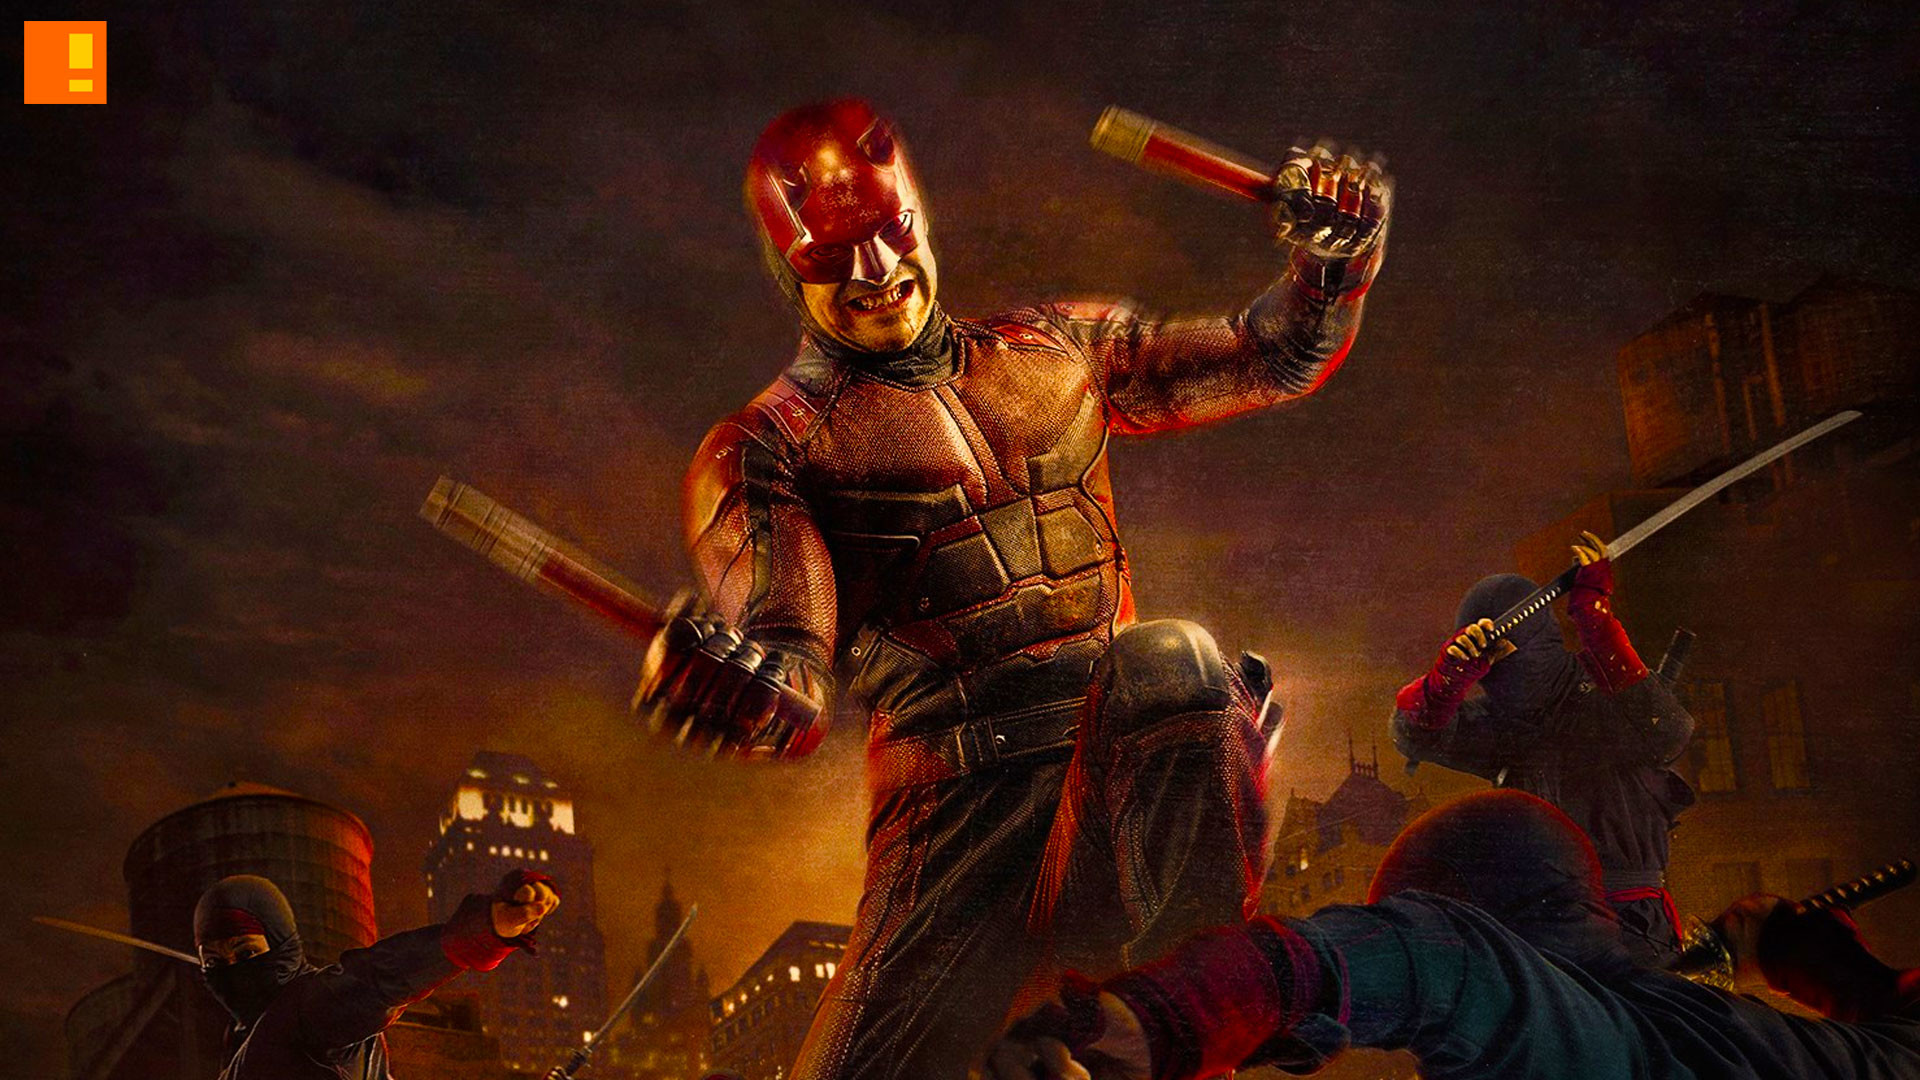 daredevil netflix wallpaper,action adventure game,pc game,fictional character,movie,action film